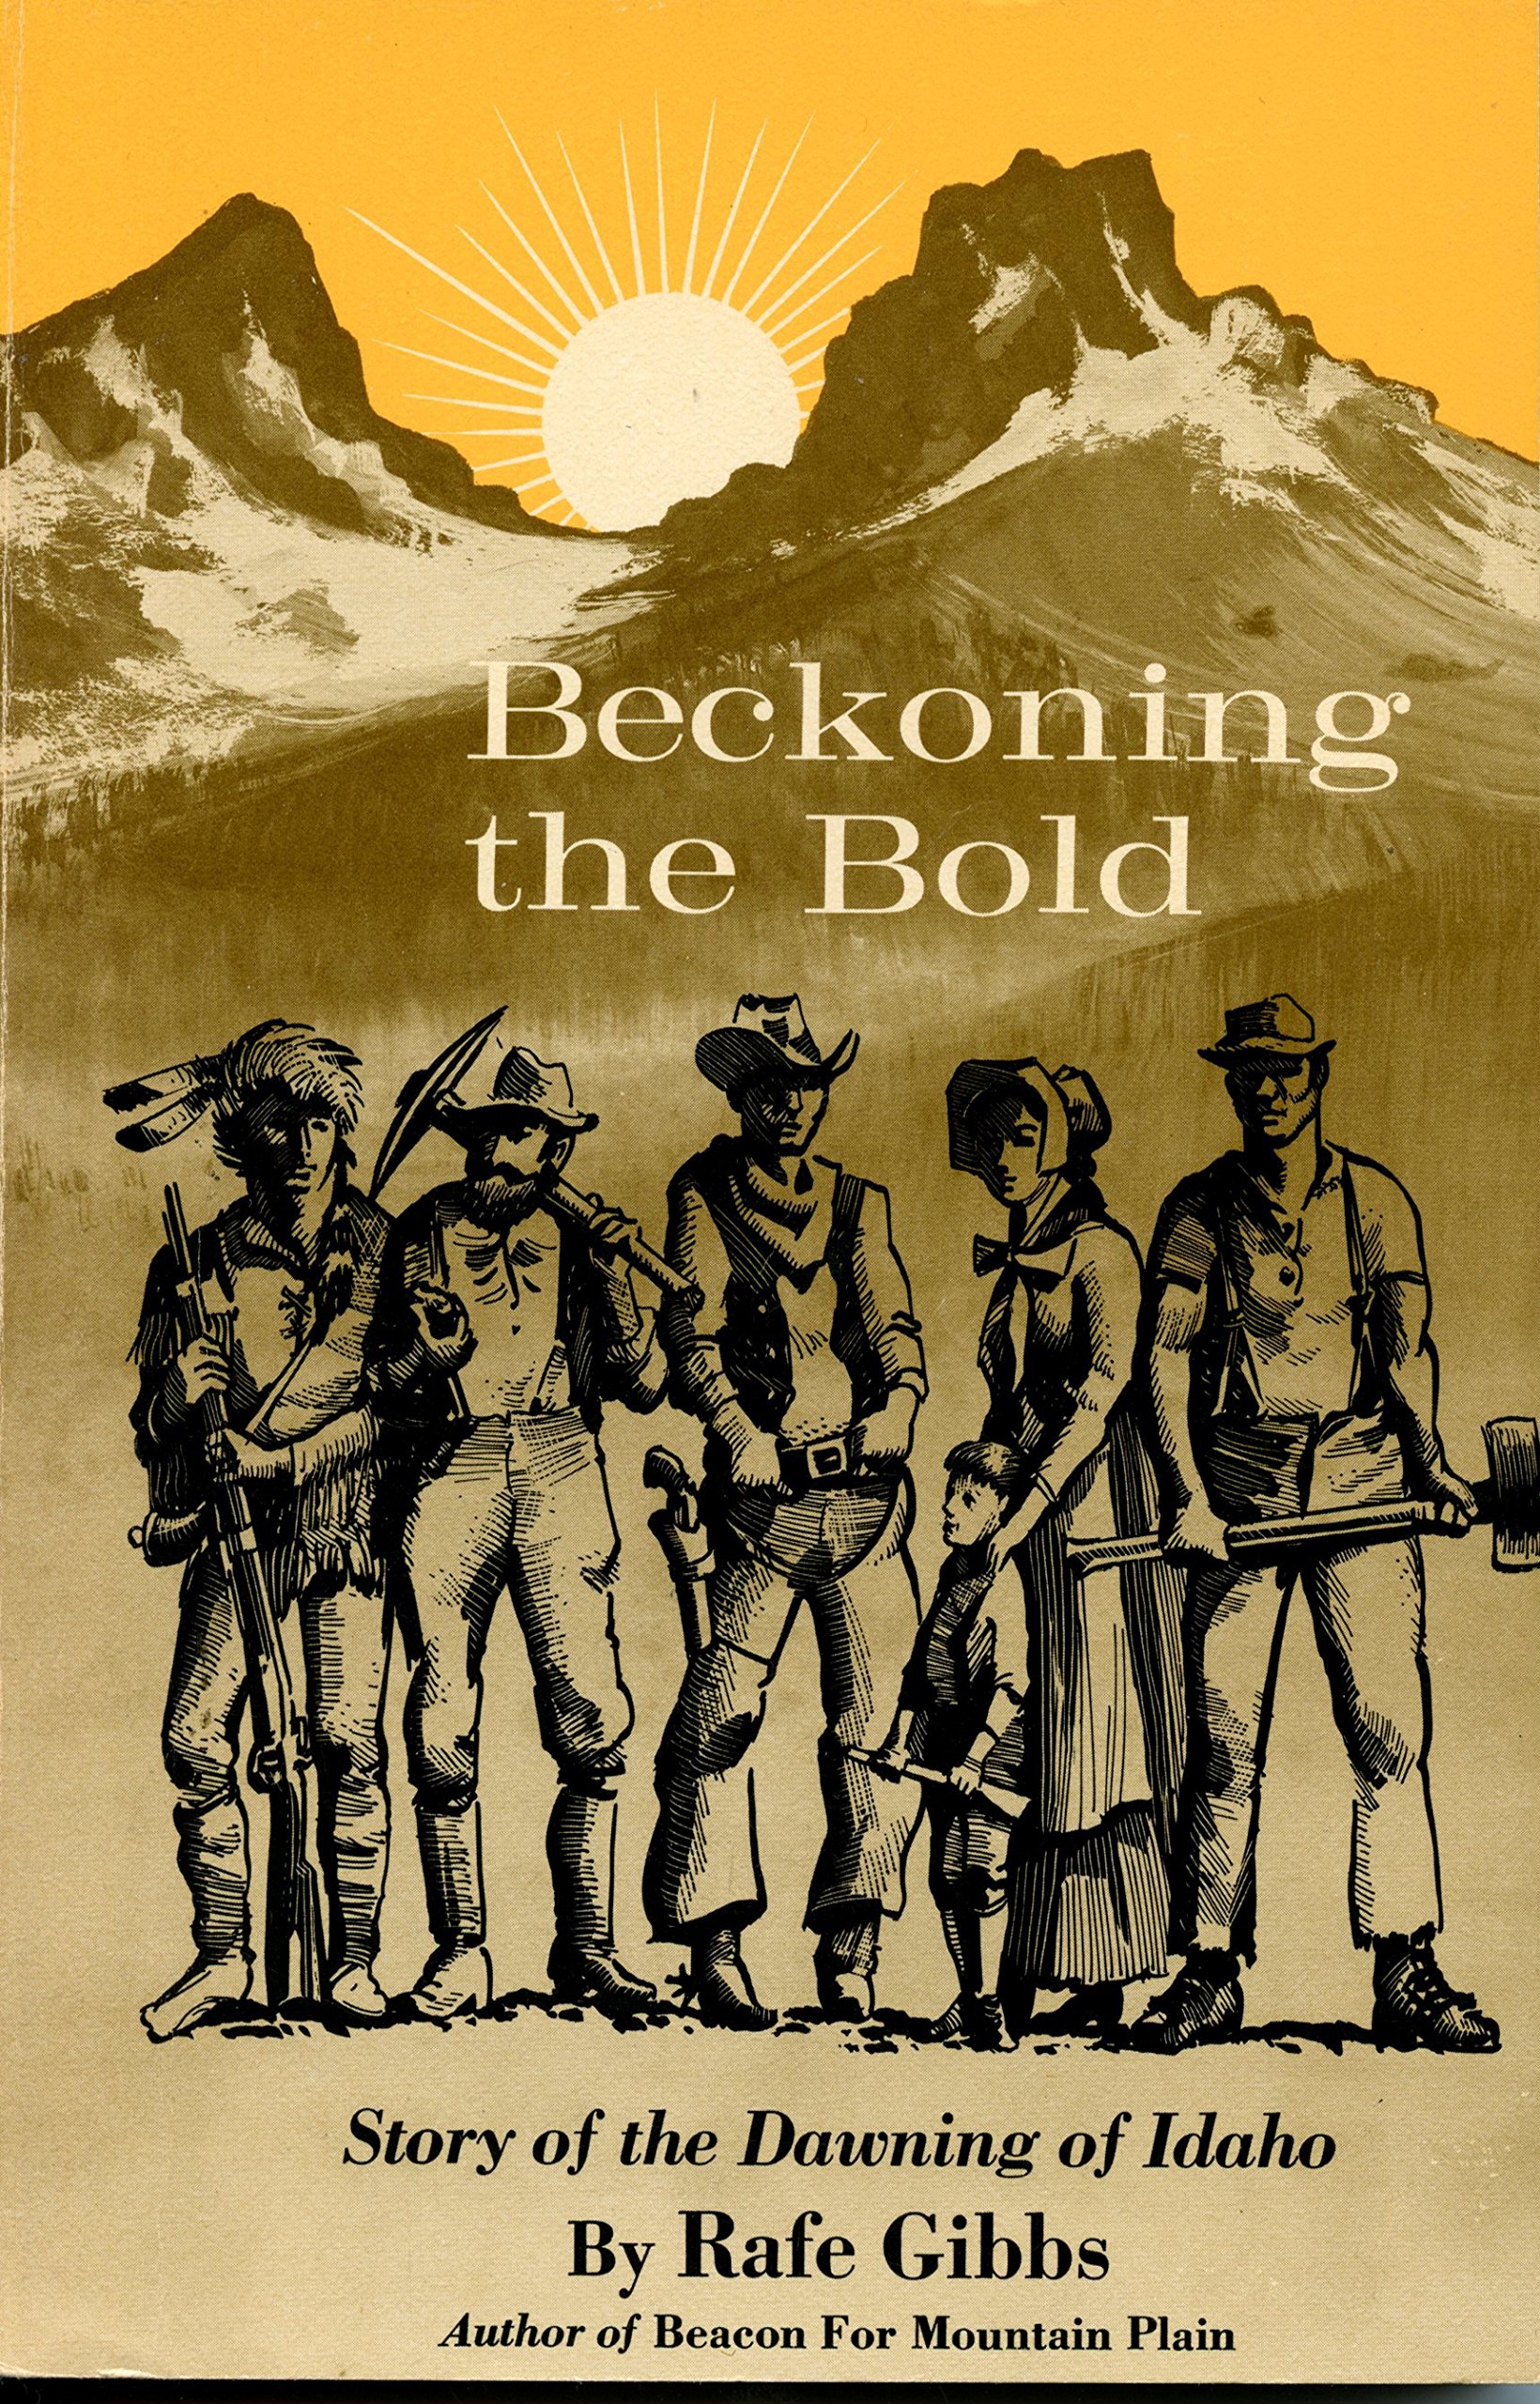 Beckoning the bold: Story of the dawning of Idaho (book cover)